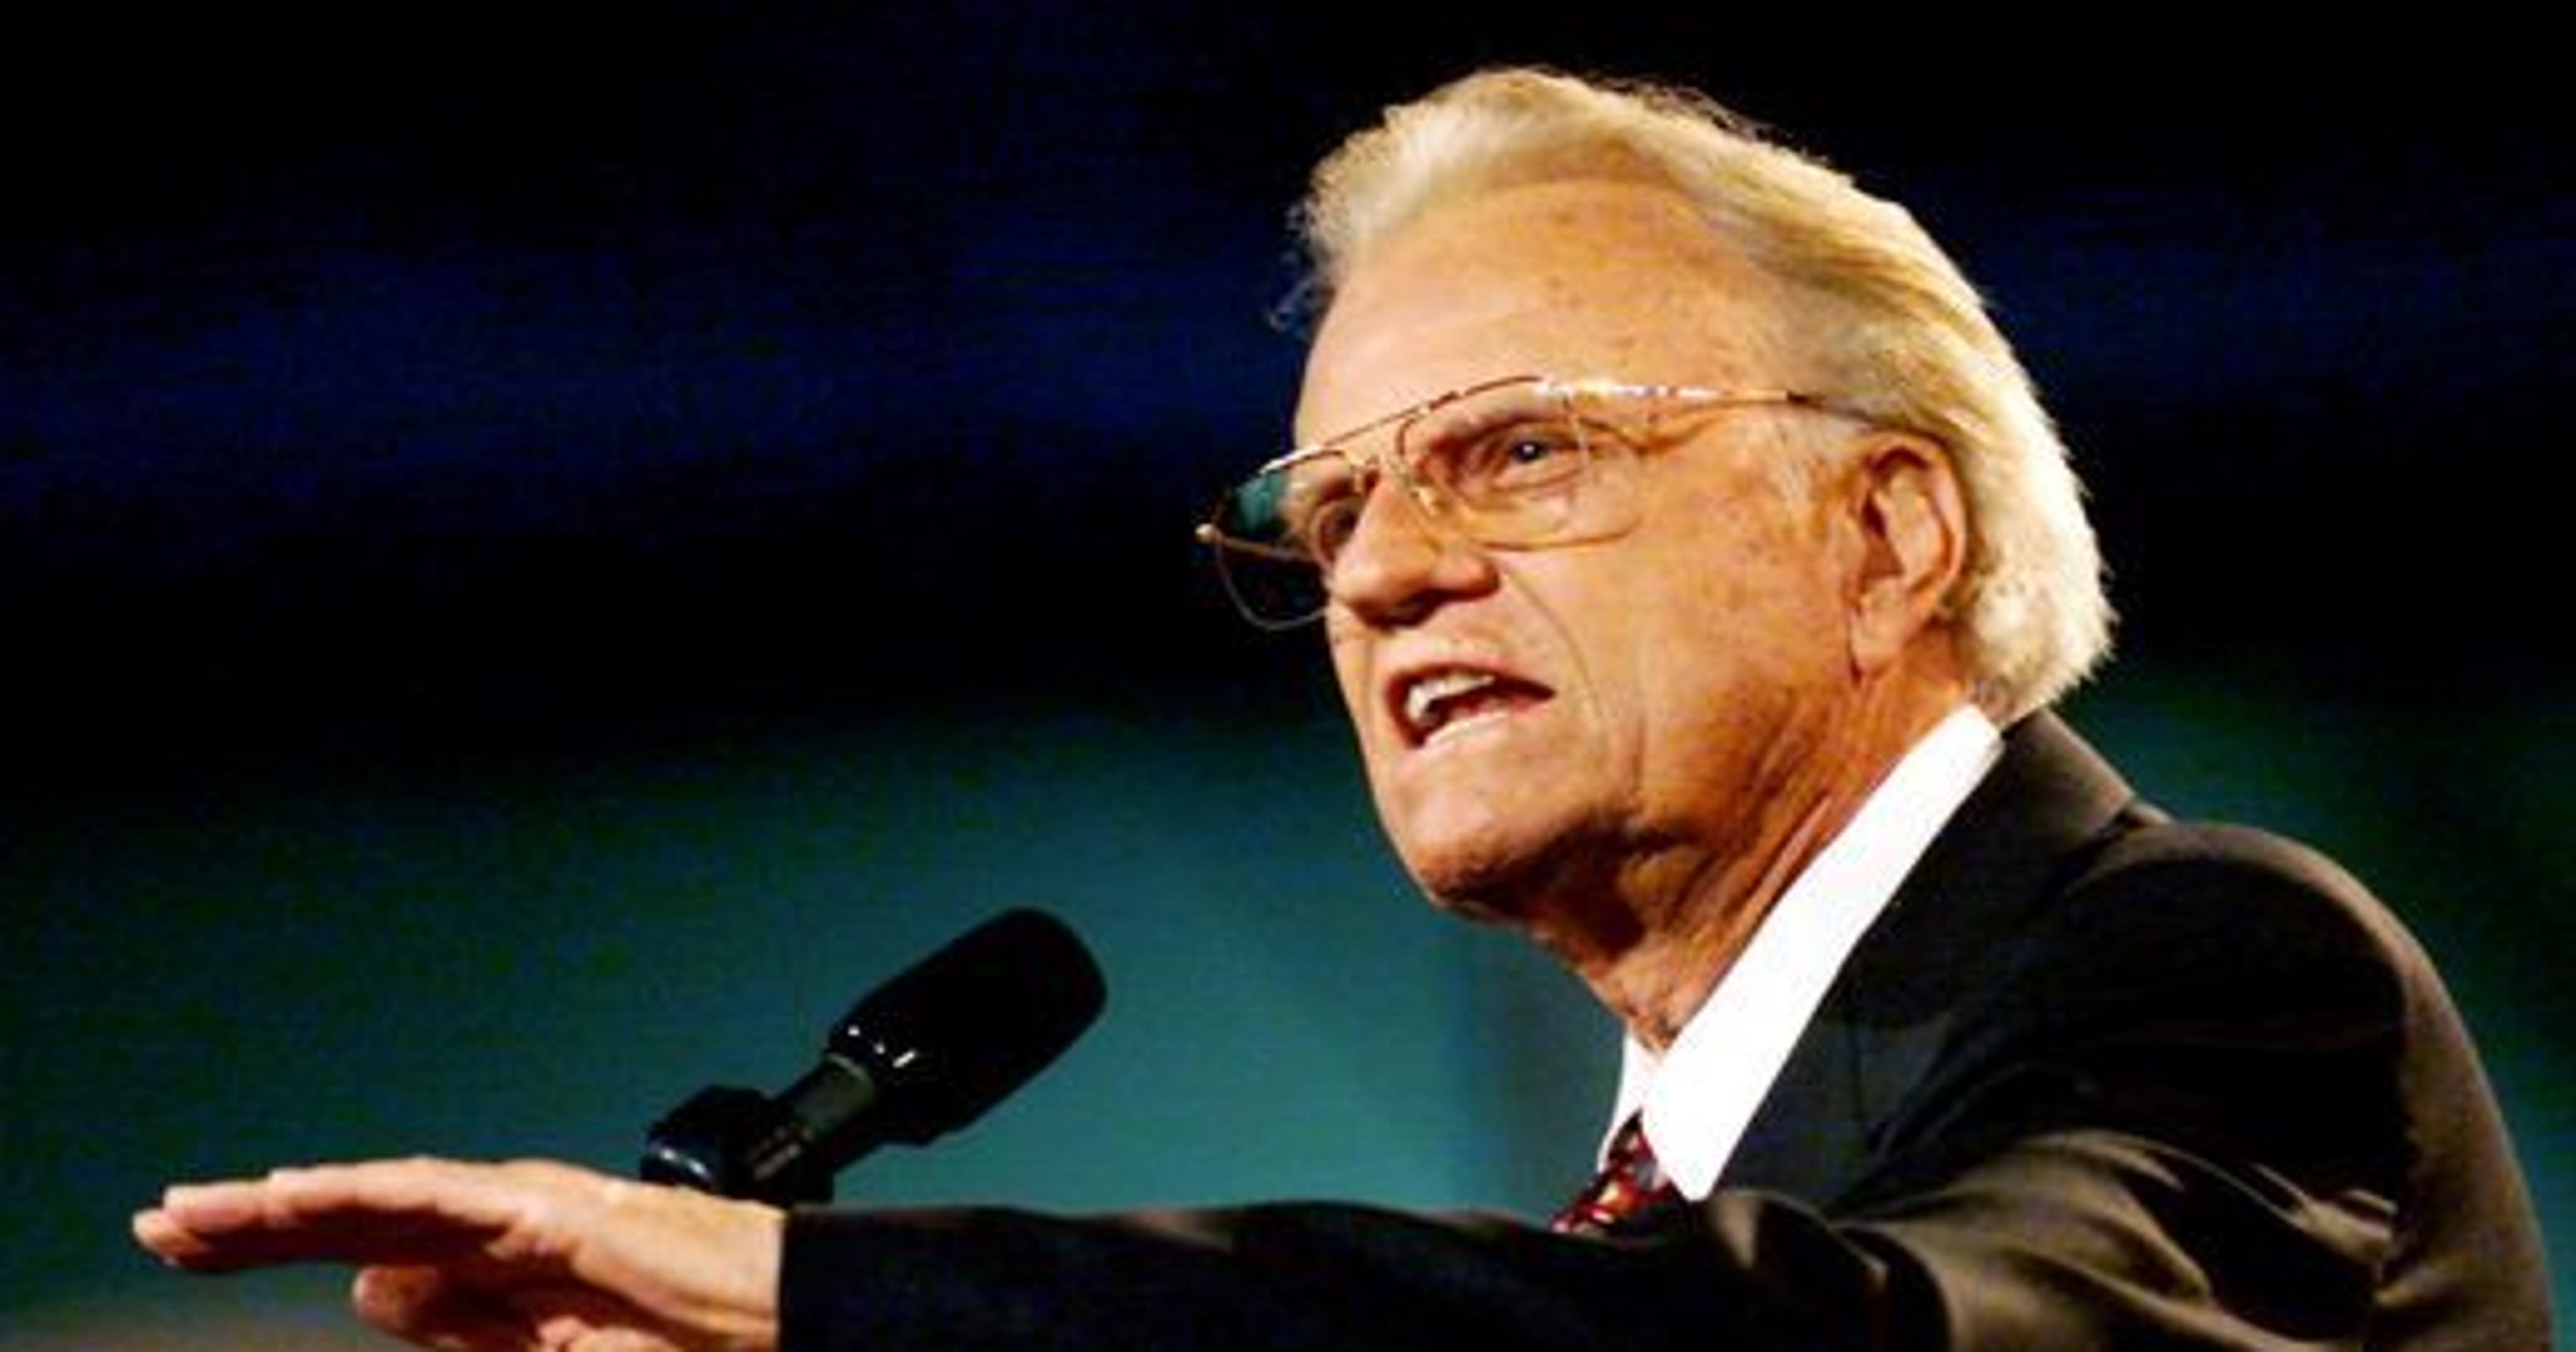 Men Skinny Dipping Gay Porn - Memorable quotes from Rev. Billy Graham